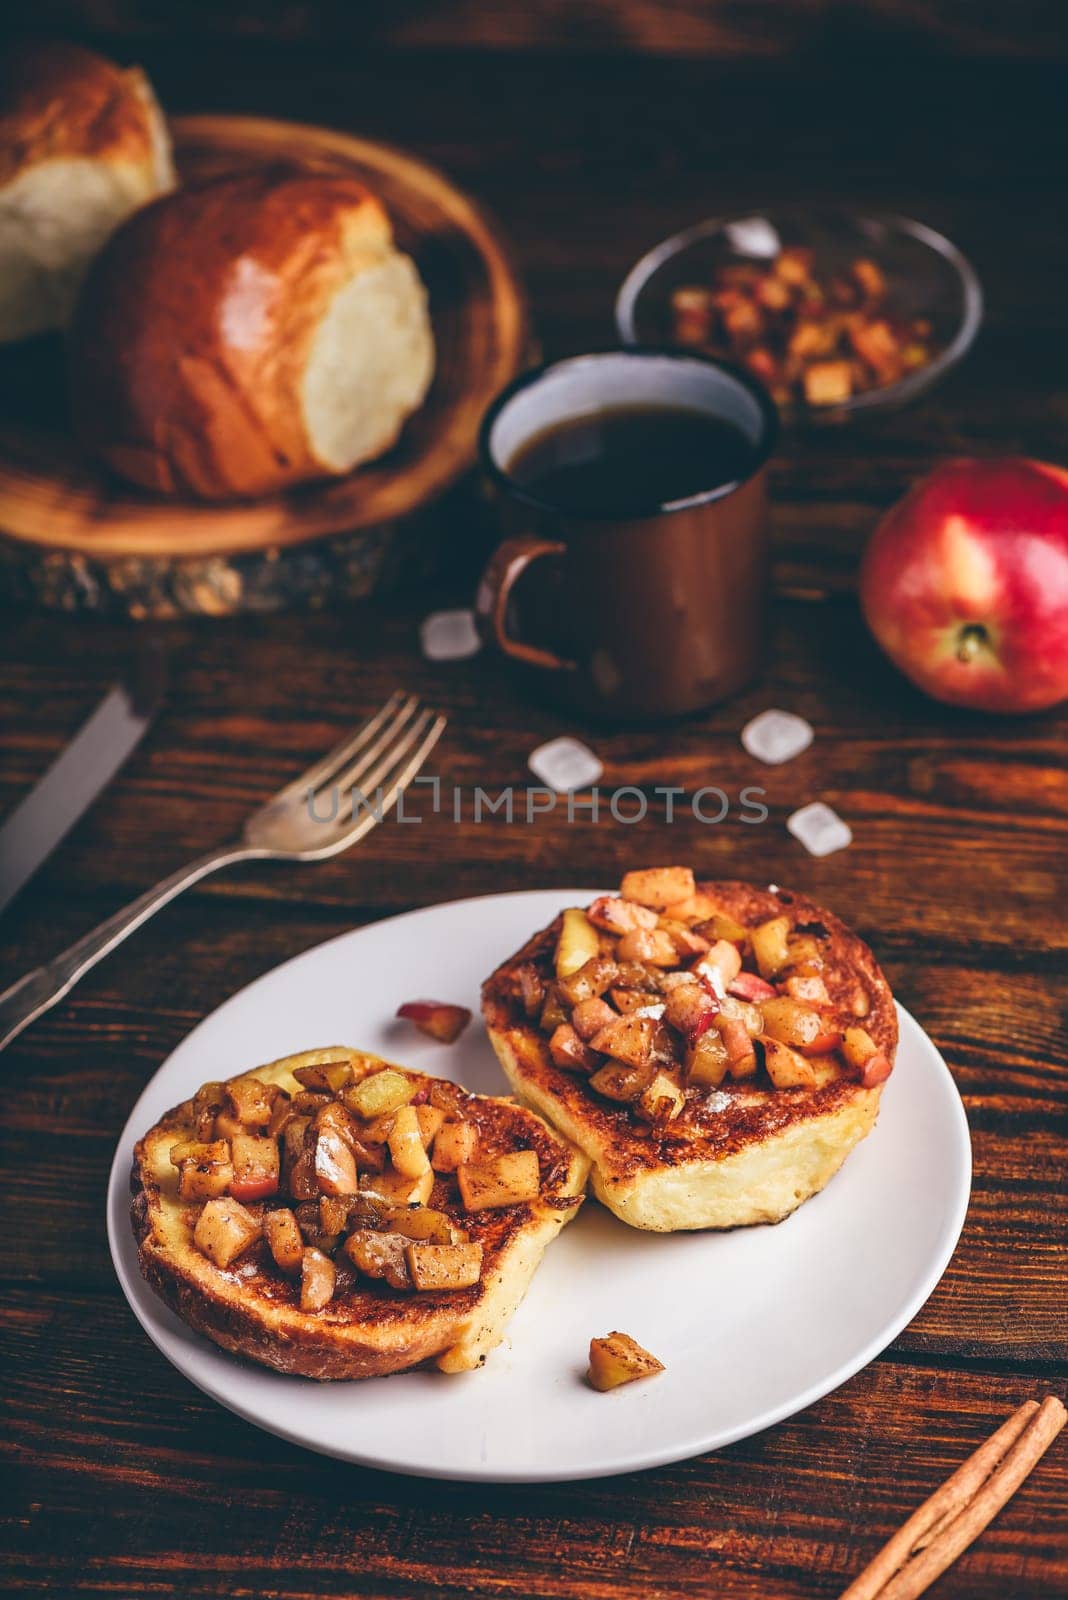 French toasts with caramelized apple by Seva_blsv